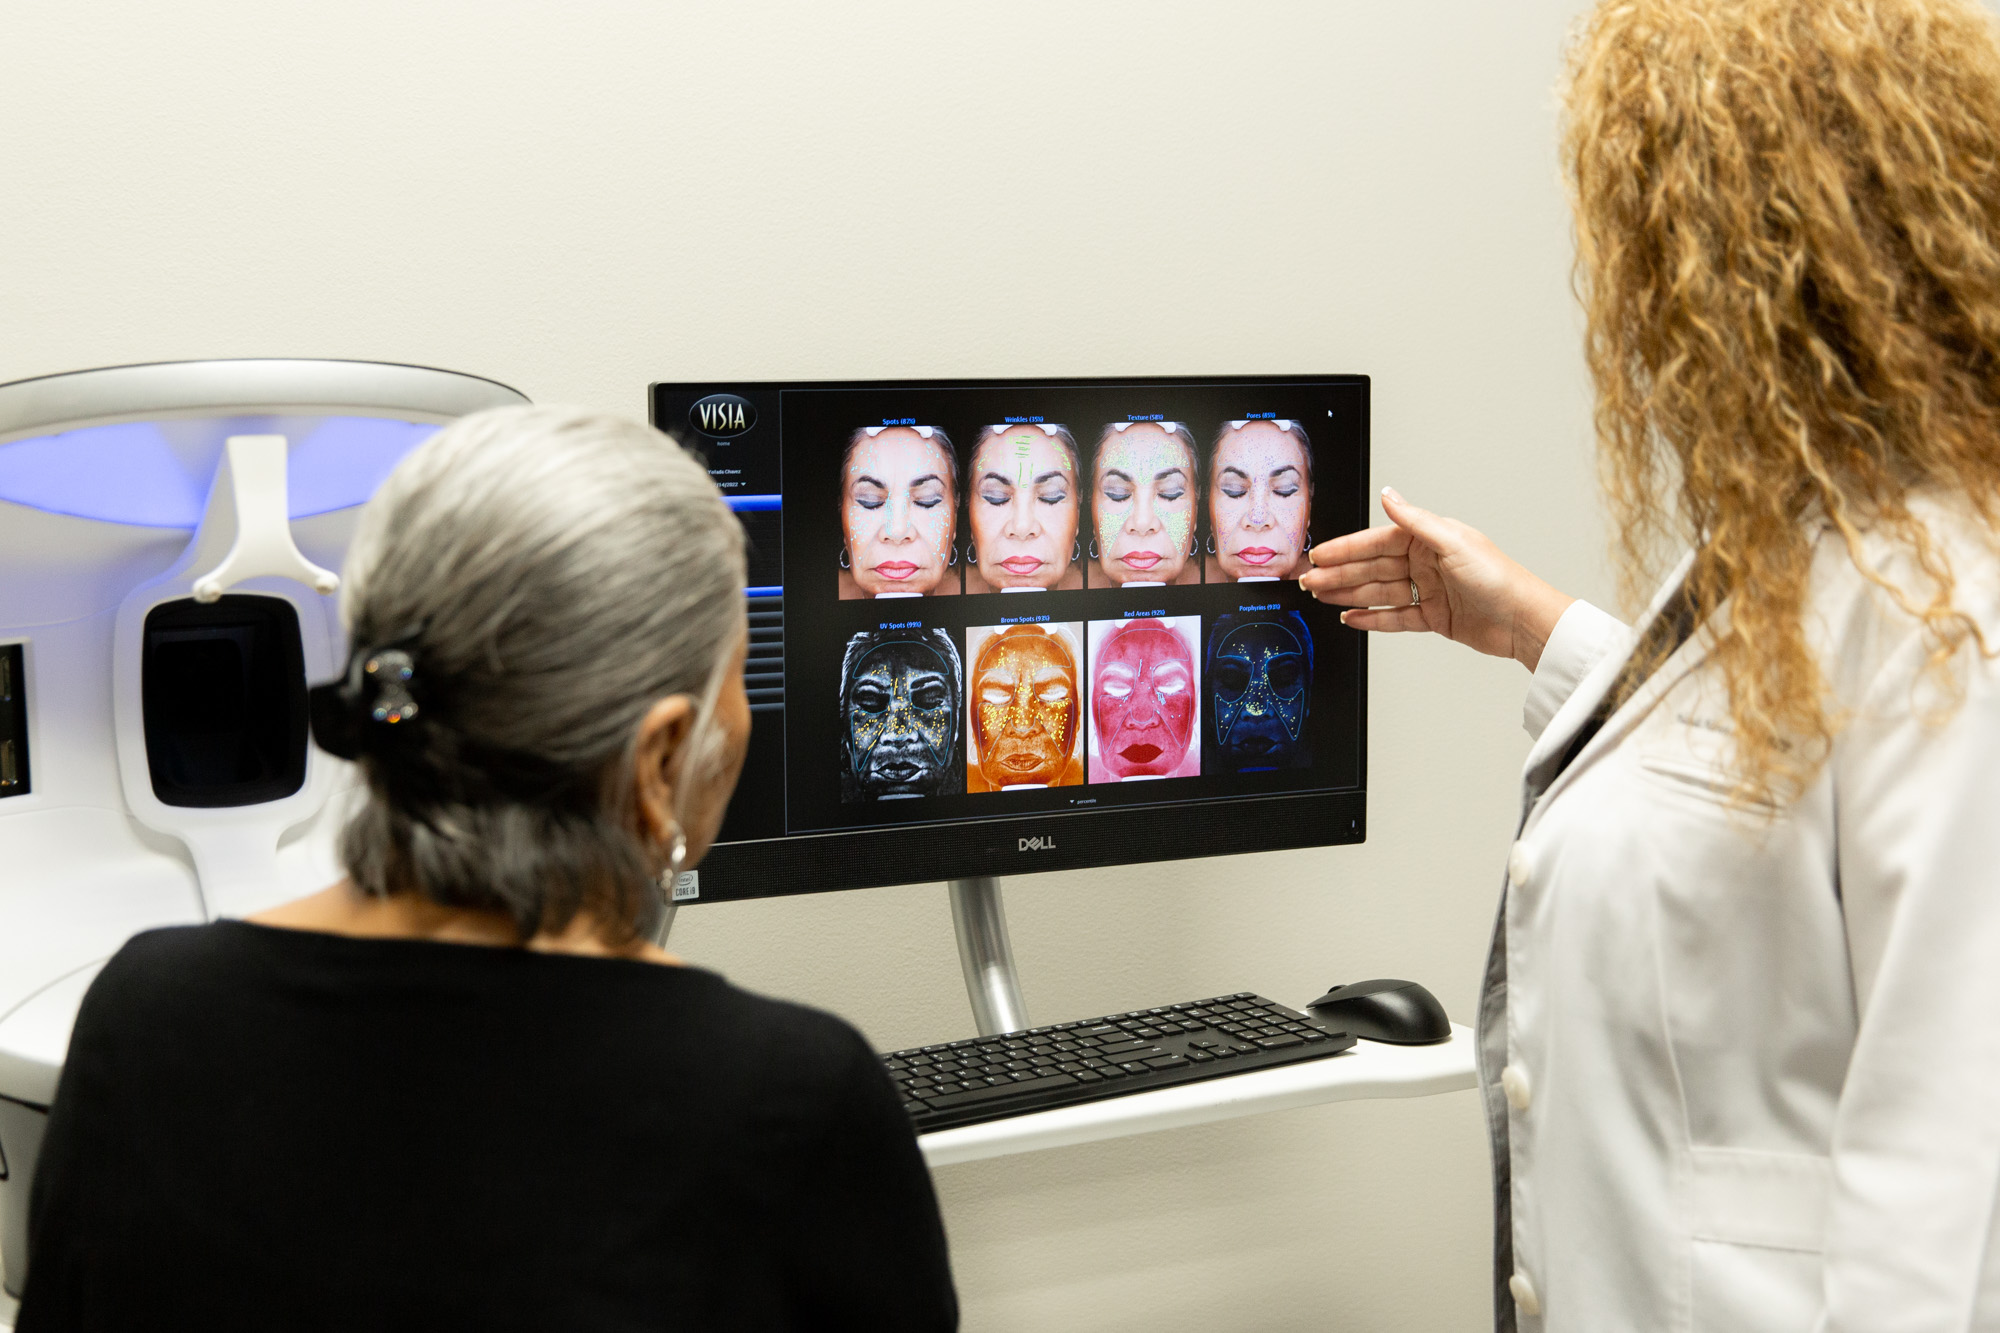 Dr. Marcos shows a patient the results of their VISIA face scan on a computer. The faces of the doctor and patient are not visible.